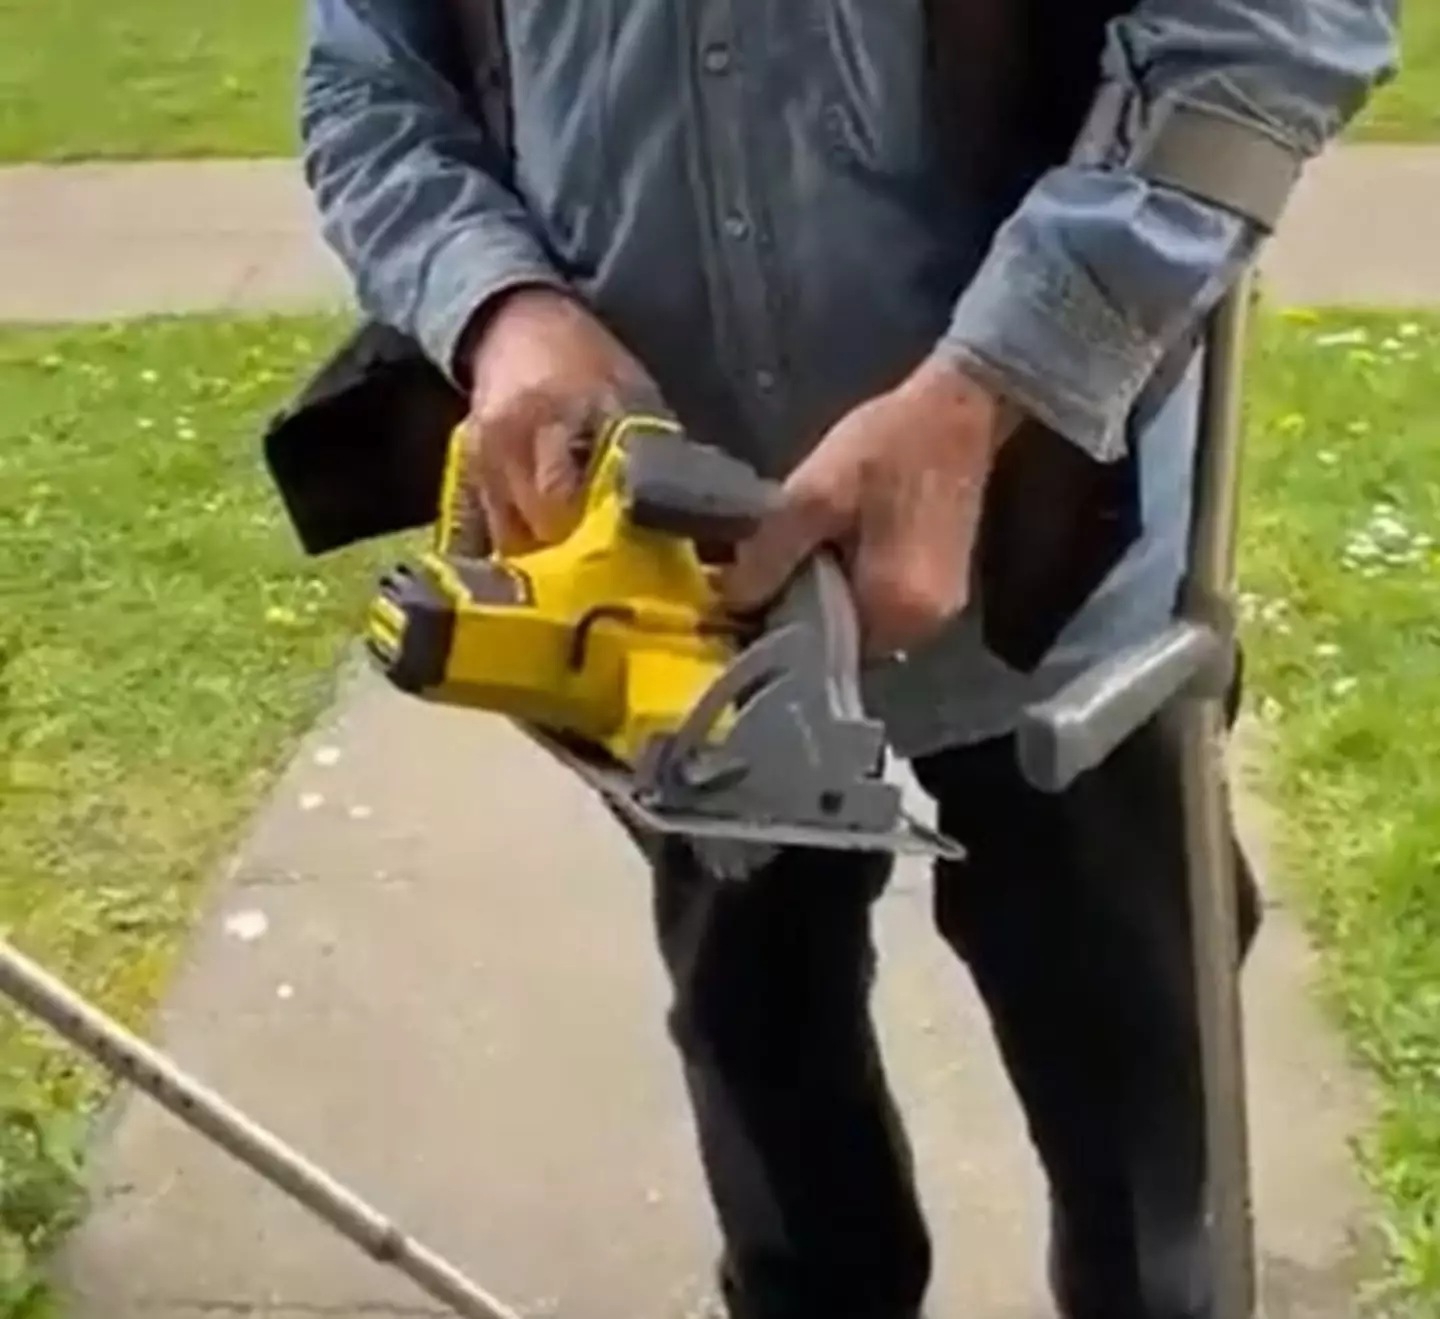 A frightening clip shows a landlord going after a tenant with an electric saw.